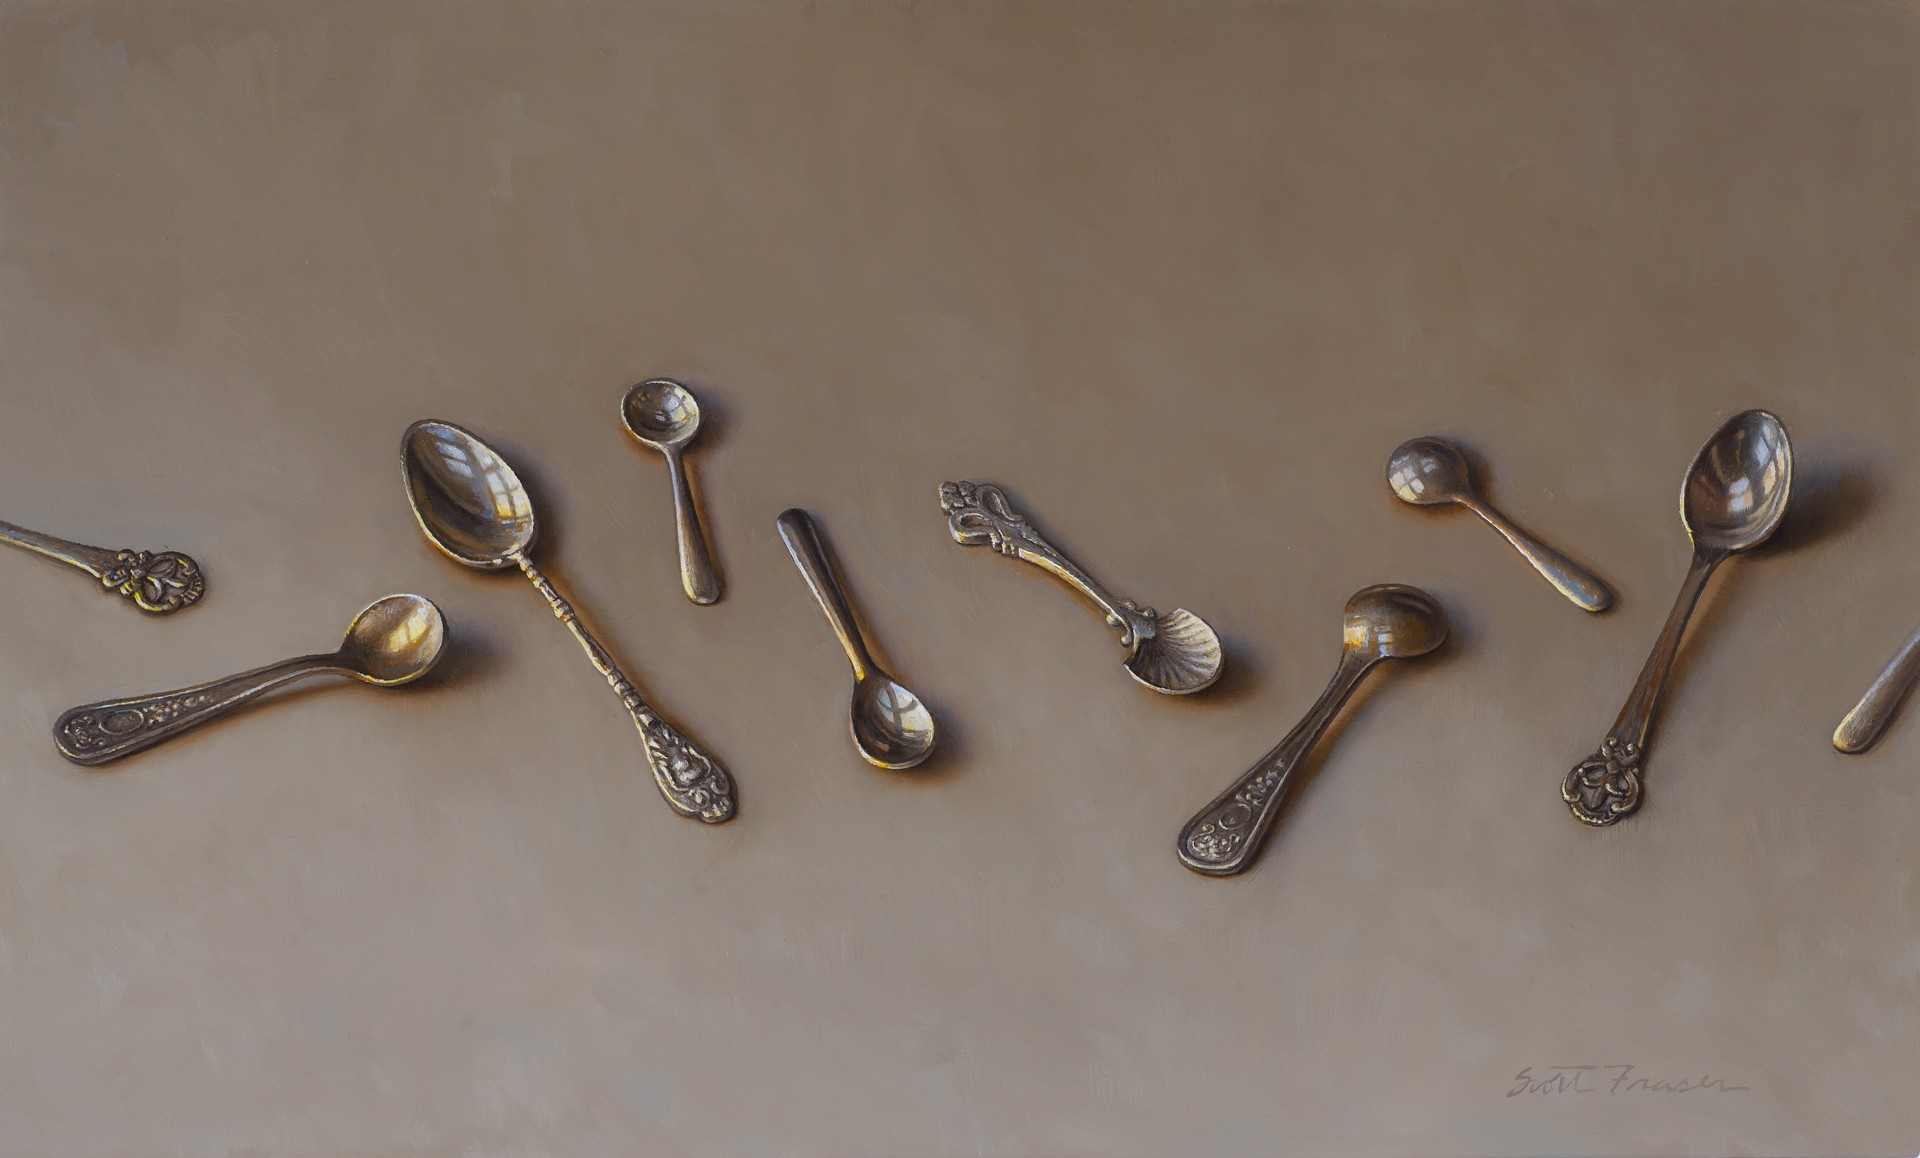 Mollie's Spoons by Scott Fraser